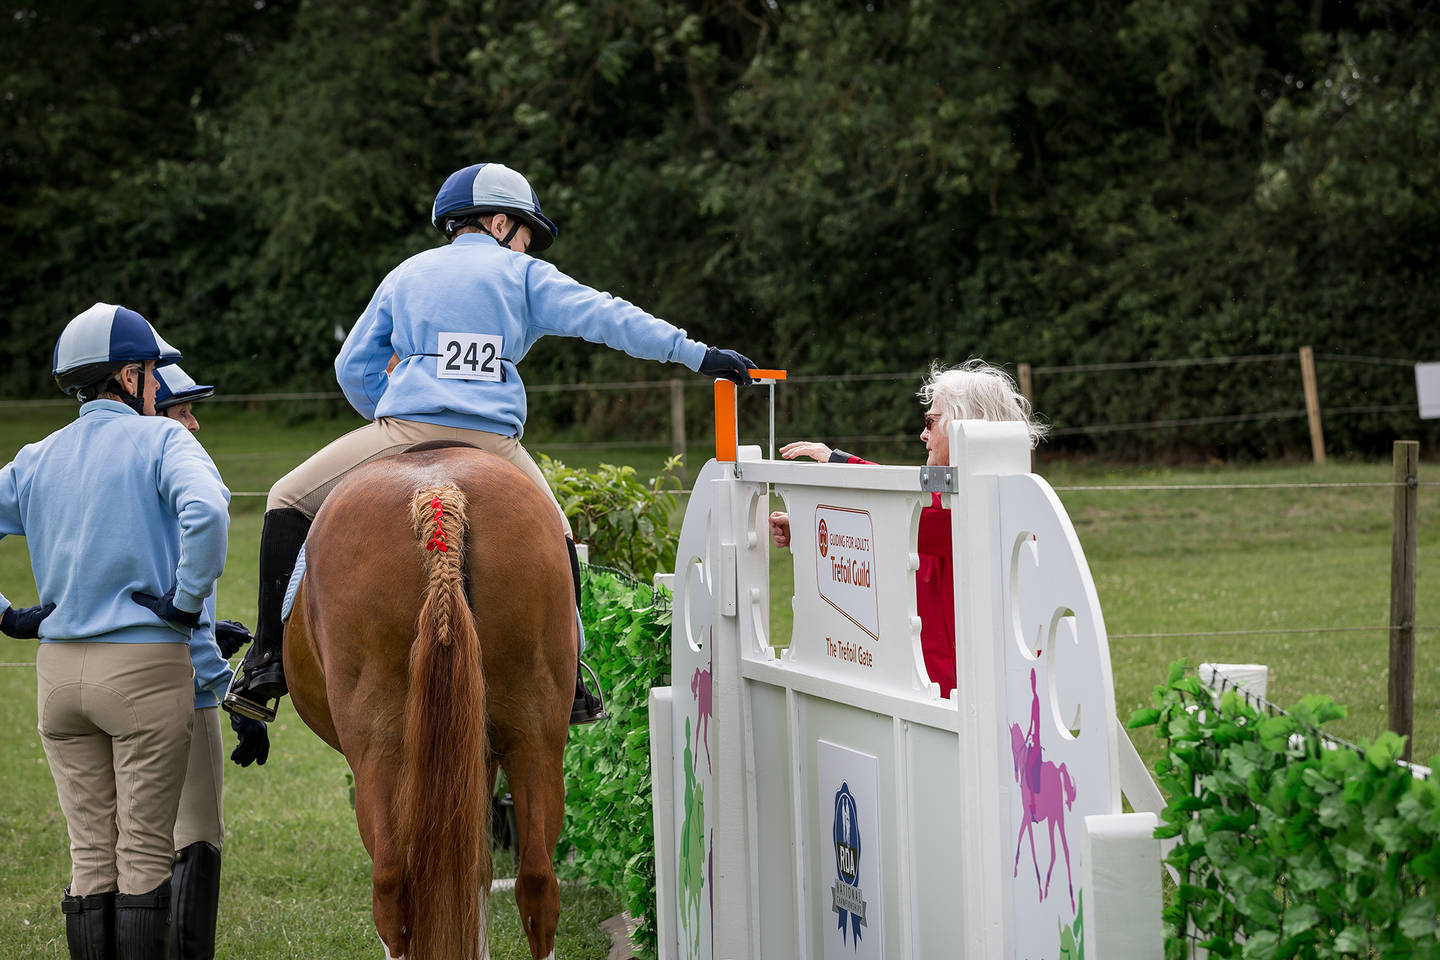 Disabled rider on horse checking height of the jump on course